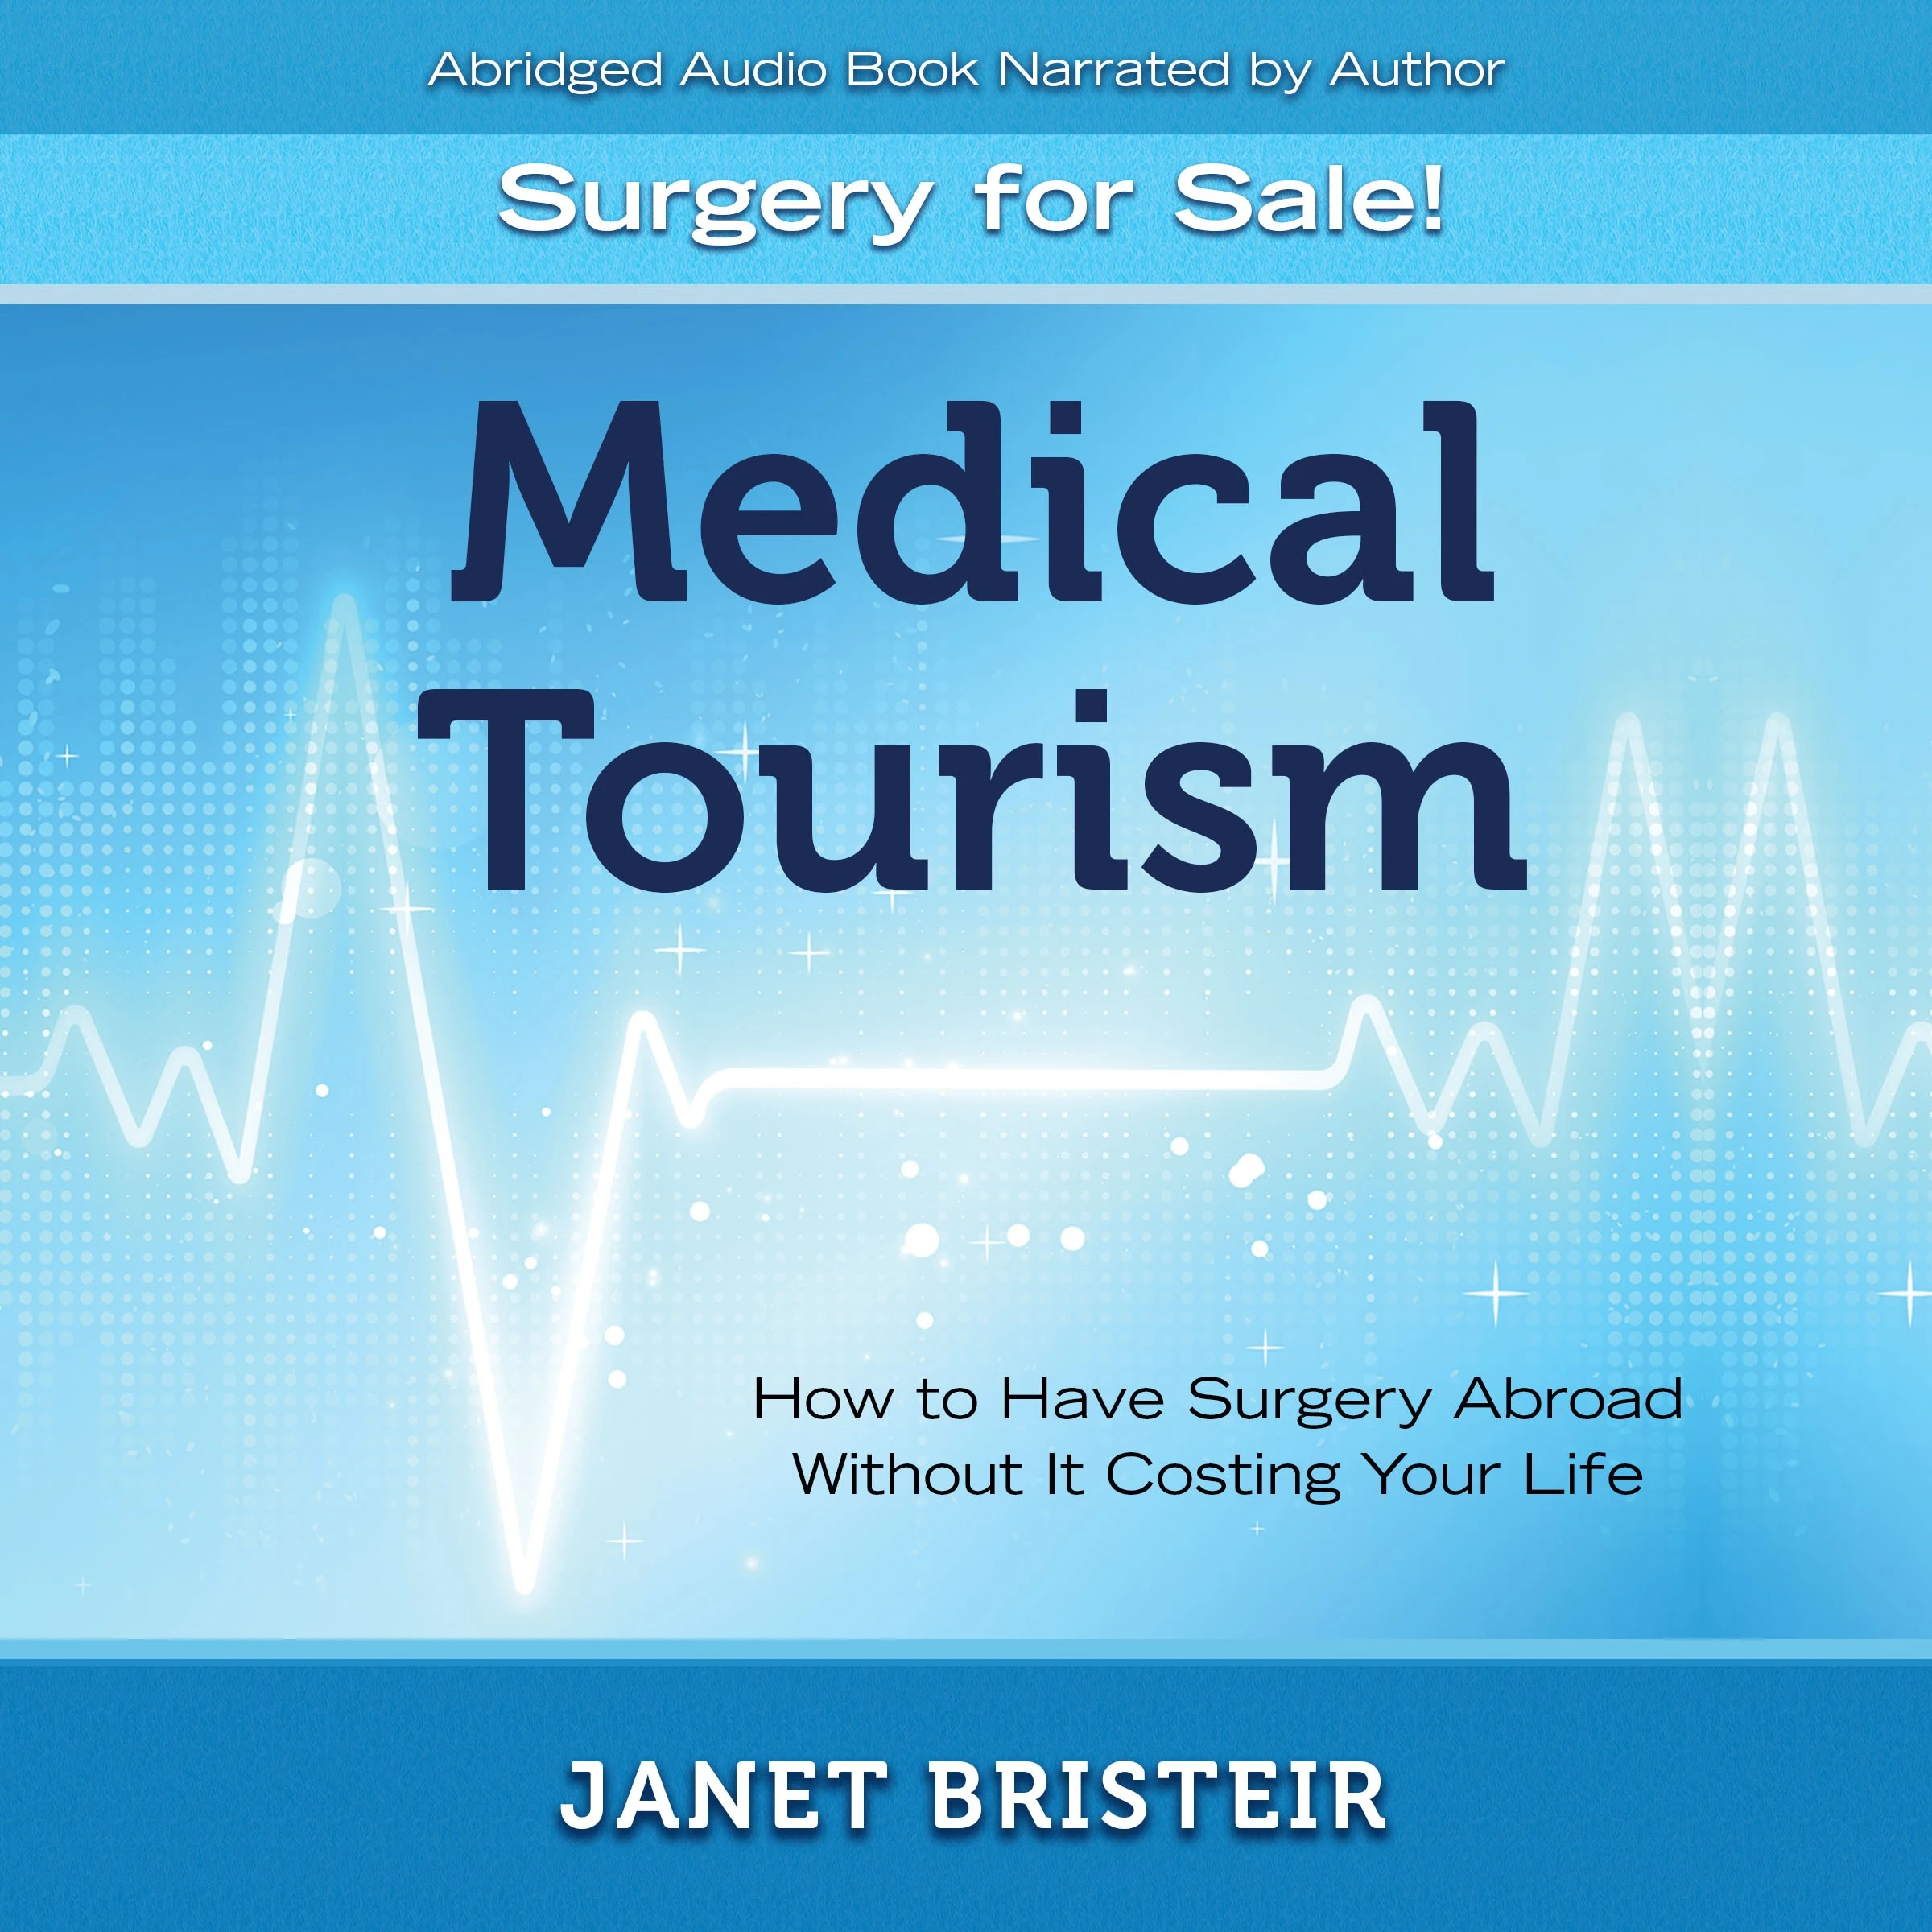 Medical Tourism - Surgery for Sale!: How to Have Surgery Abroad Without It Costing Your Life Audiobook by Janet Bristeir